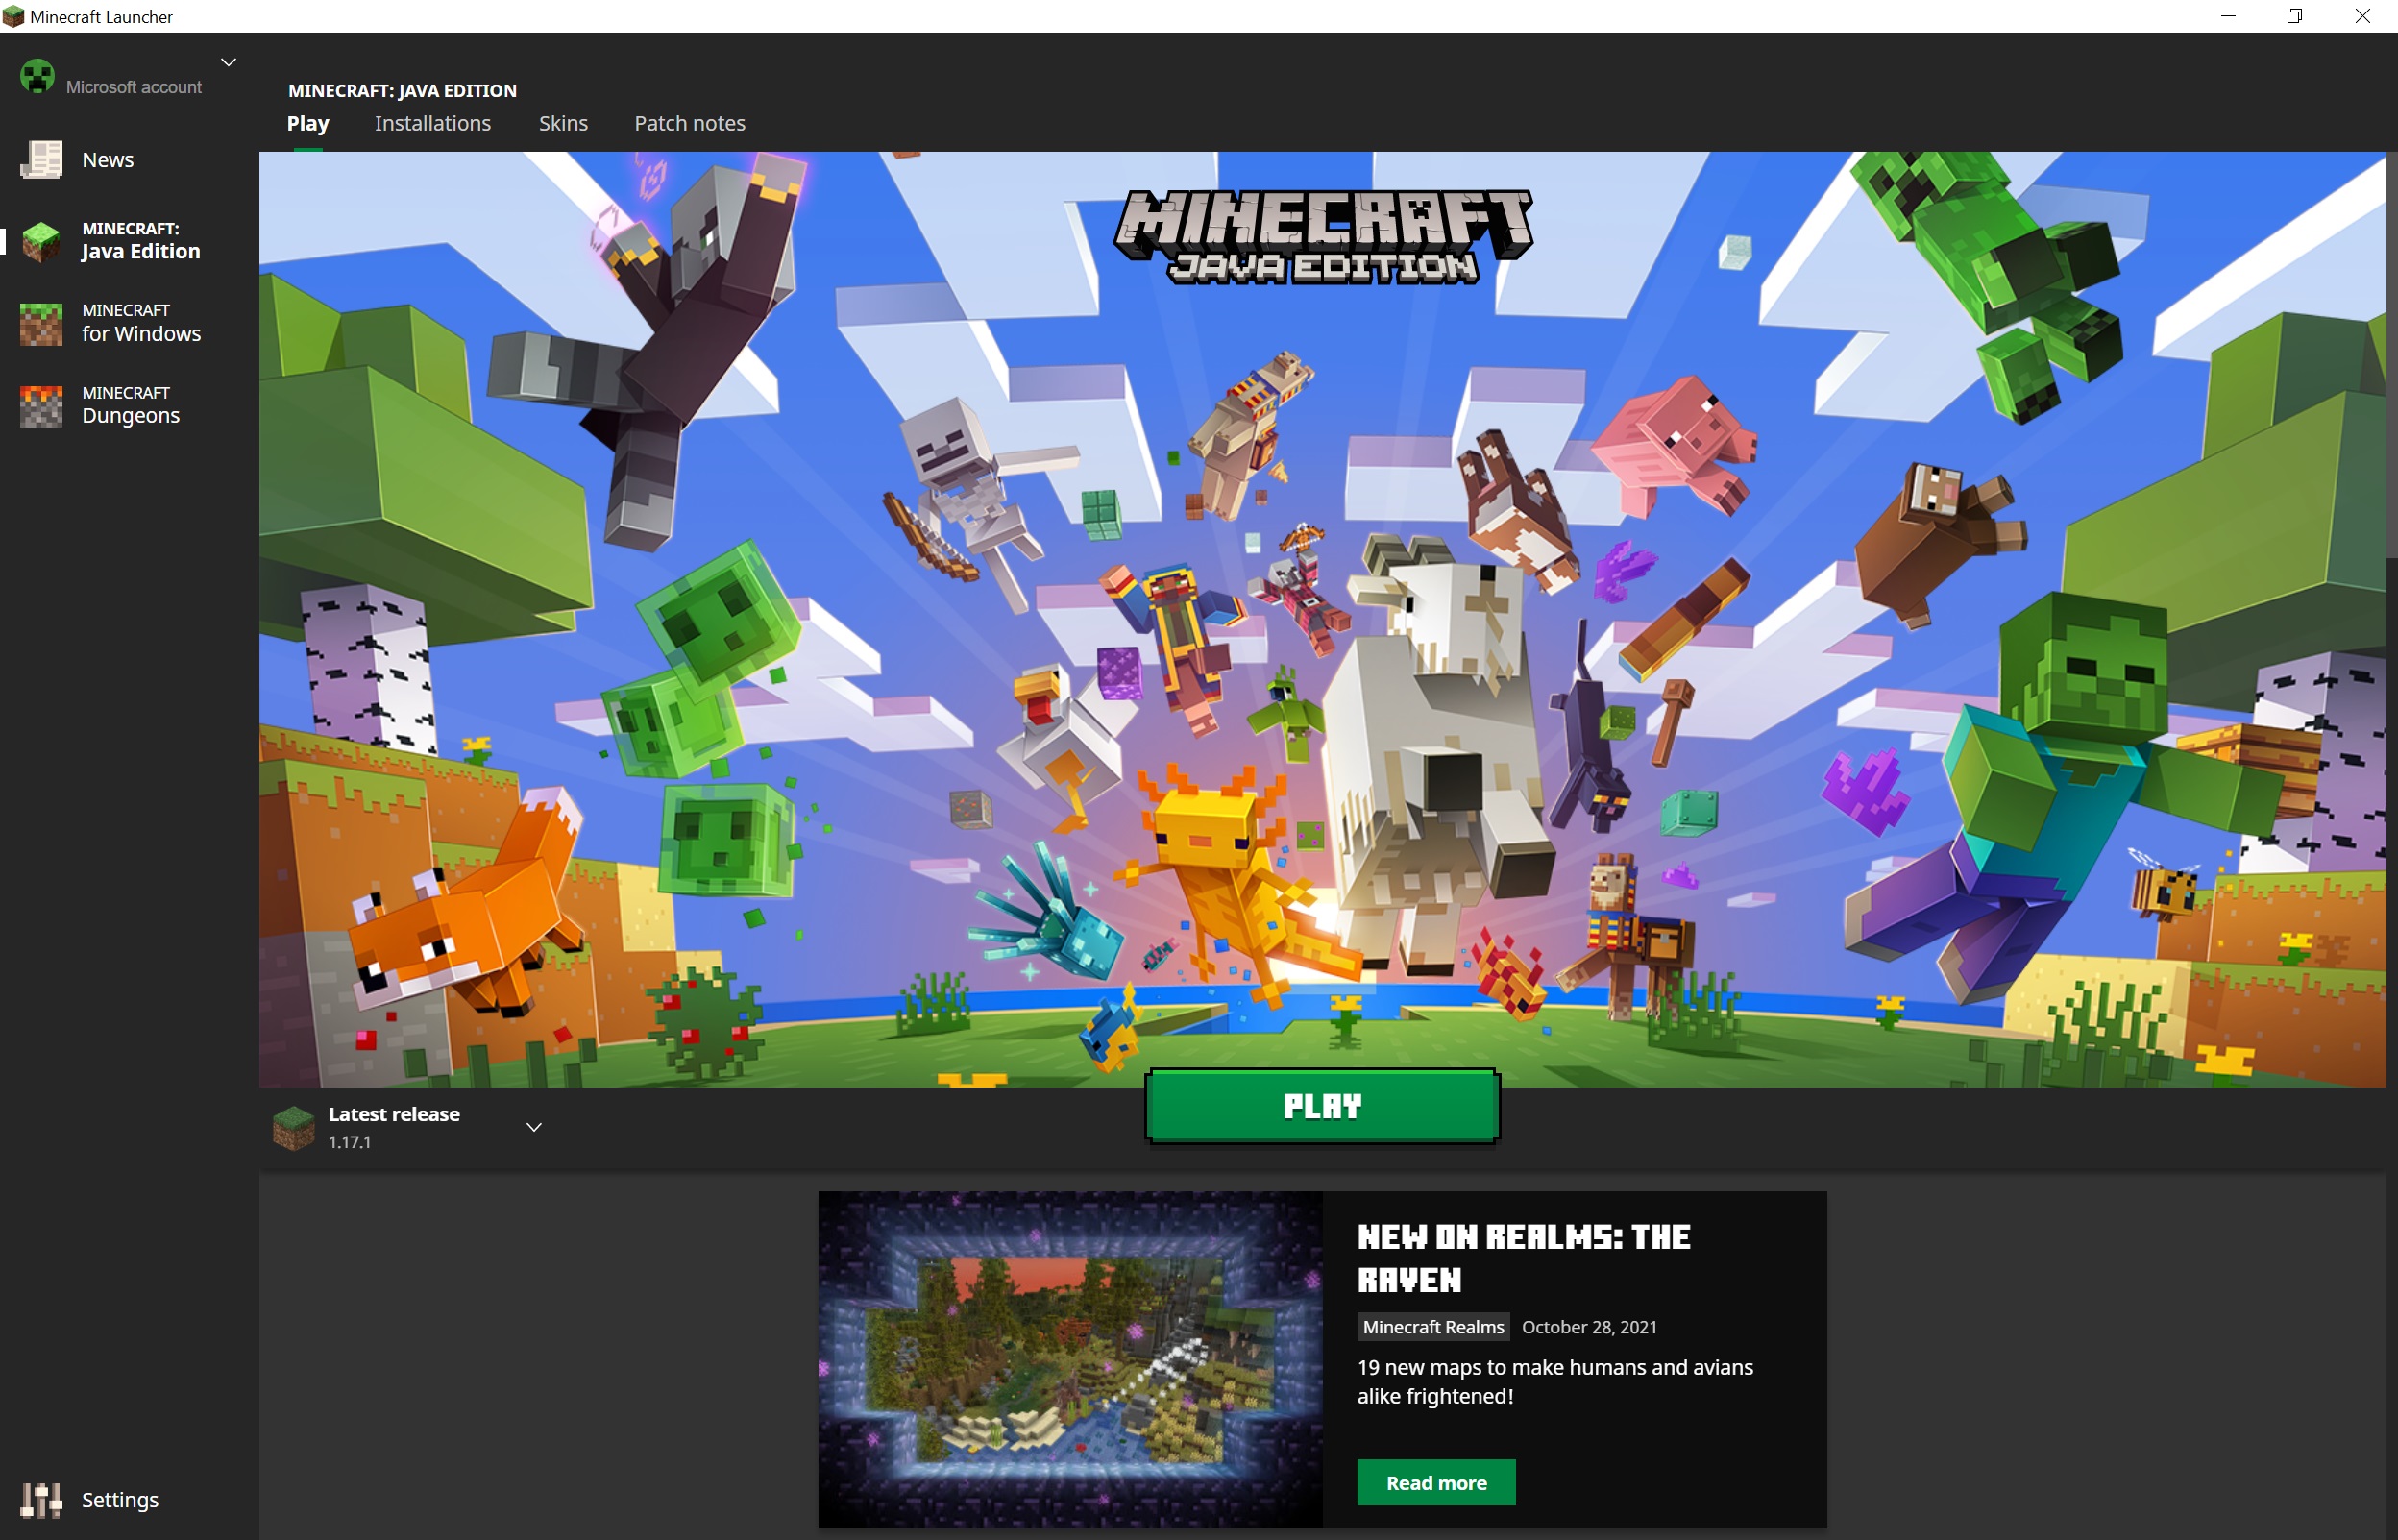 Minecraft Launcher - the new Windows 10 unified launcher for Minecraft which has Microsoft for Windows, Minecraft Java, and Minecraft Dungeons available in its sidebar.